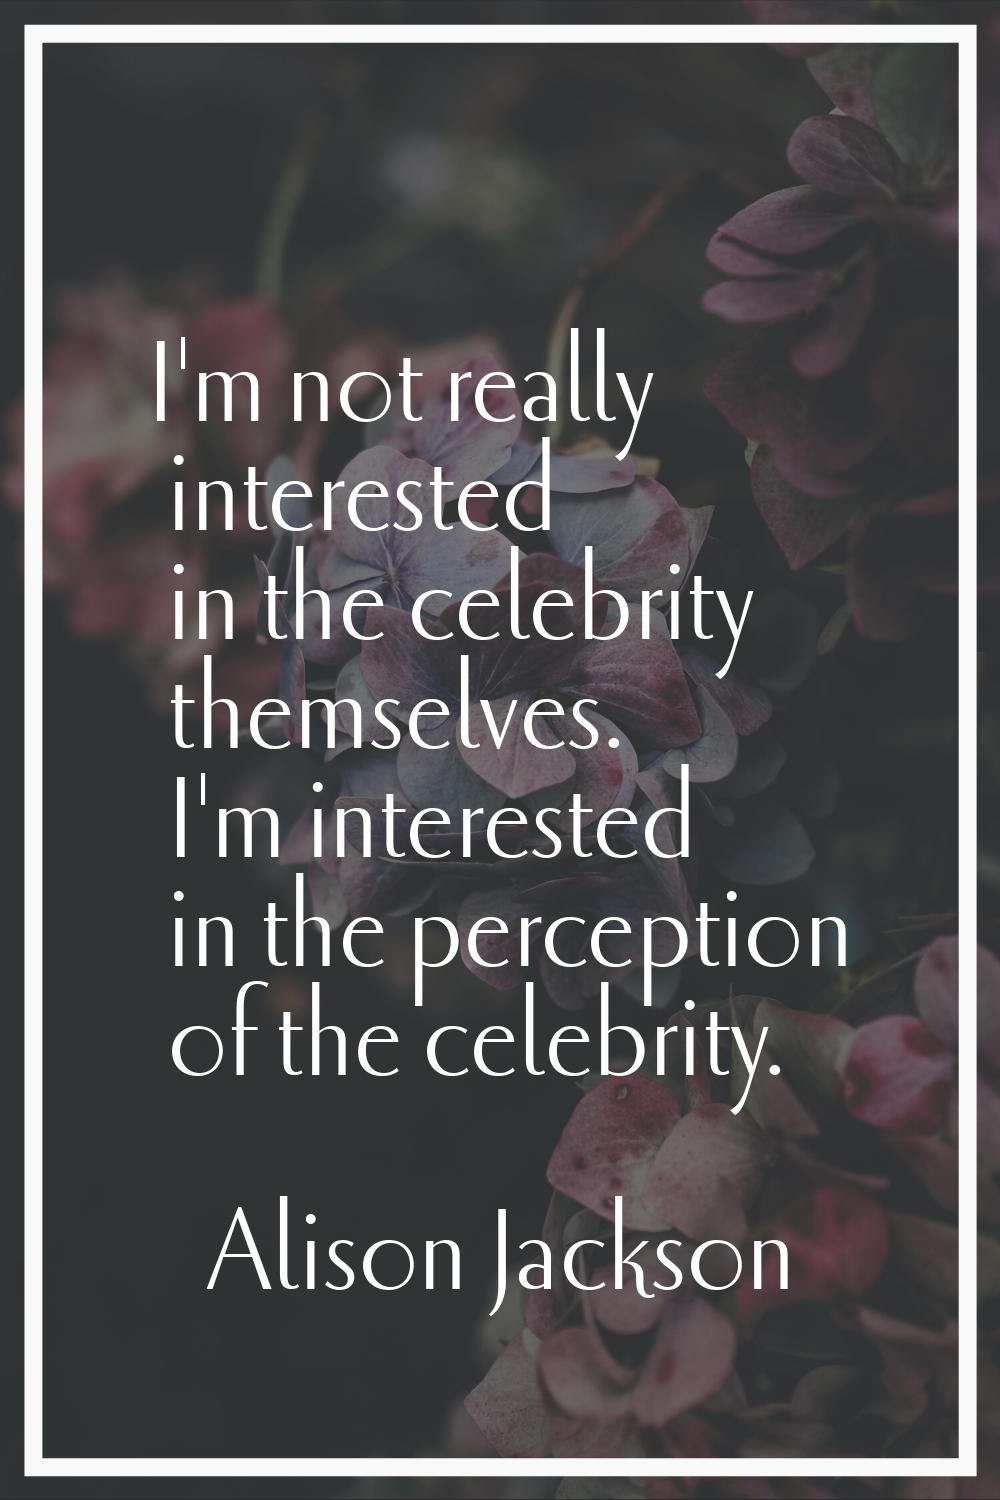 I'm not really interested in the celebrity themselves. I'm interested in the perception of the cele